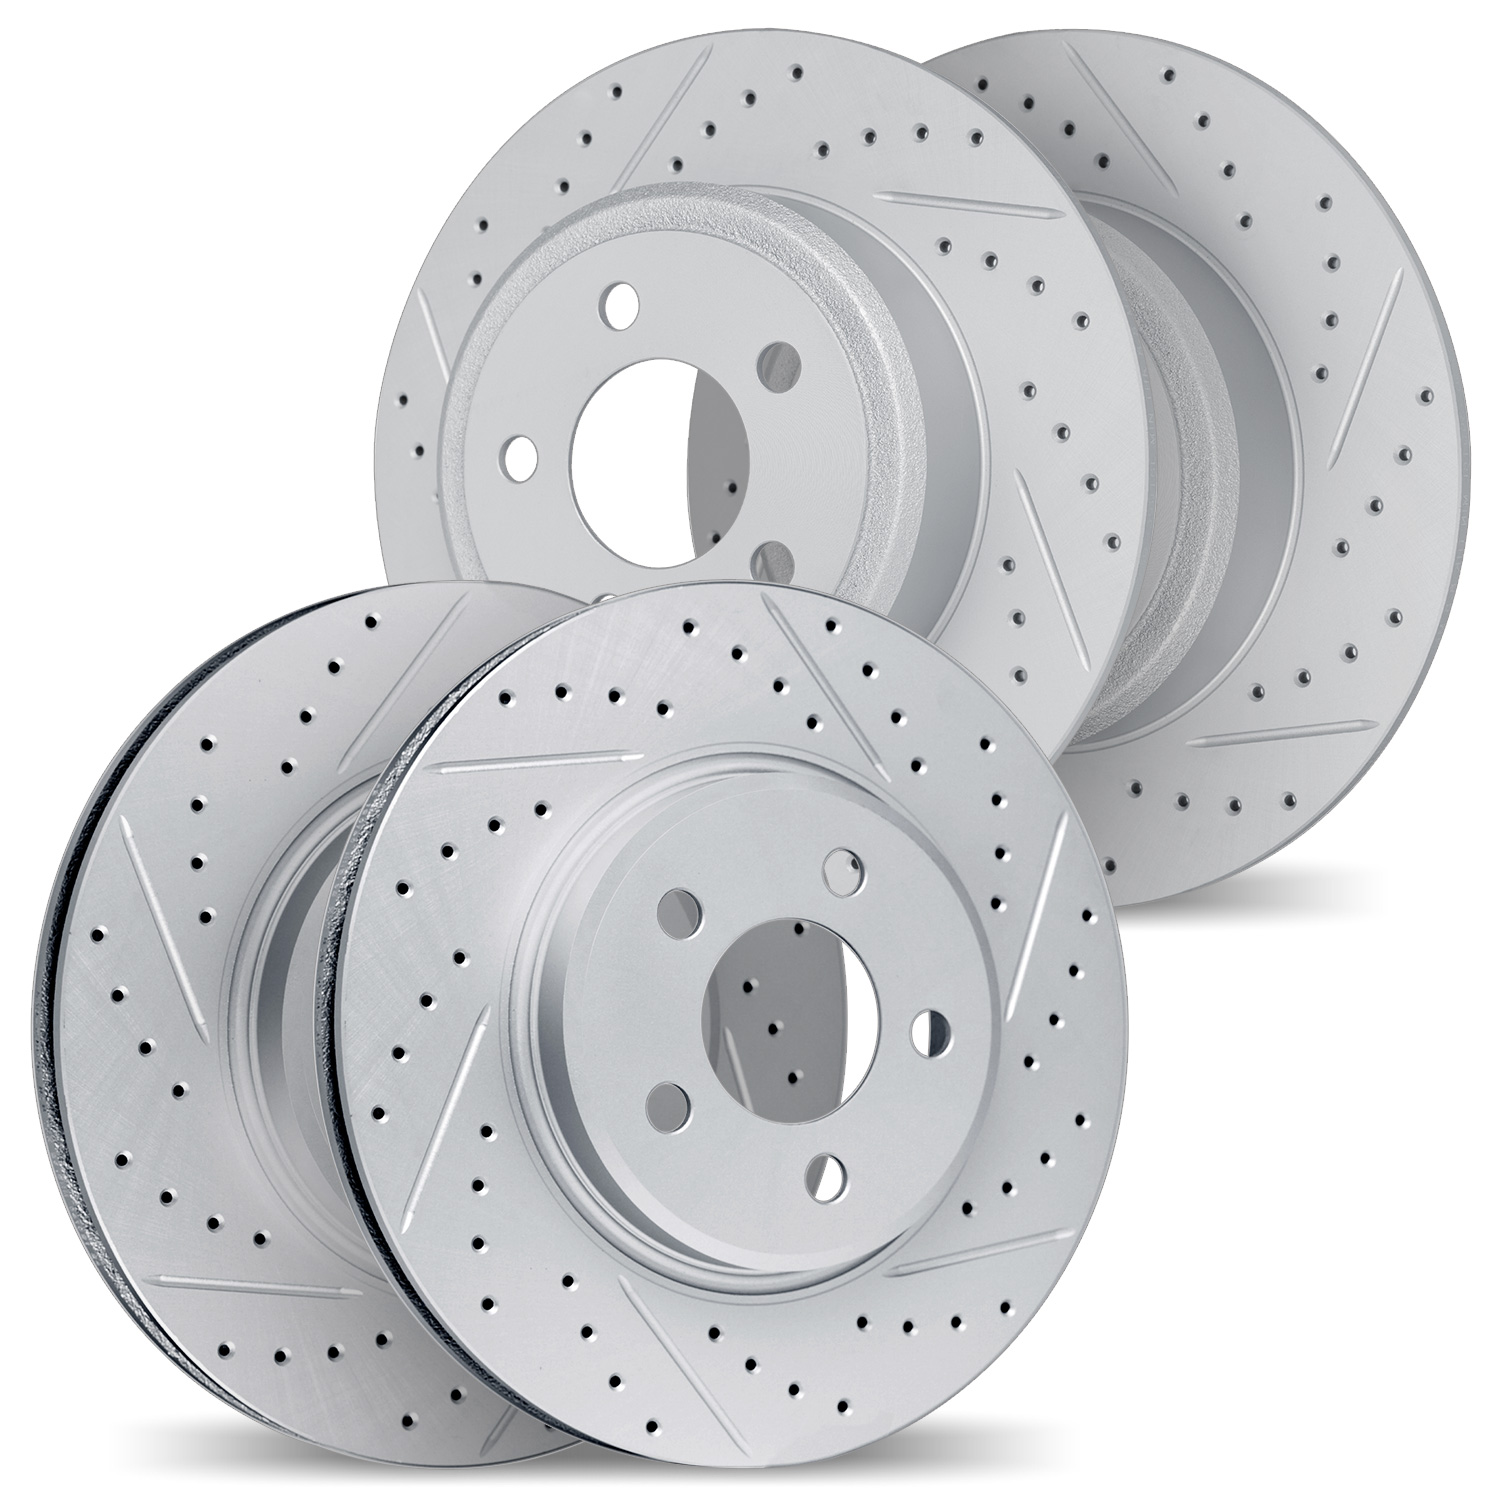 2004-67027 Geoperformance Drilled/Slotted Brake Rotors, 2005-2008 Infiniti/Nissan, Position: Front and Rear